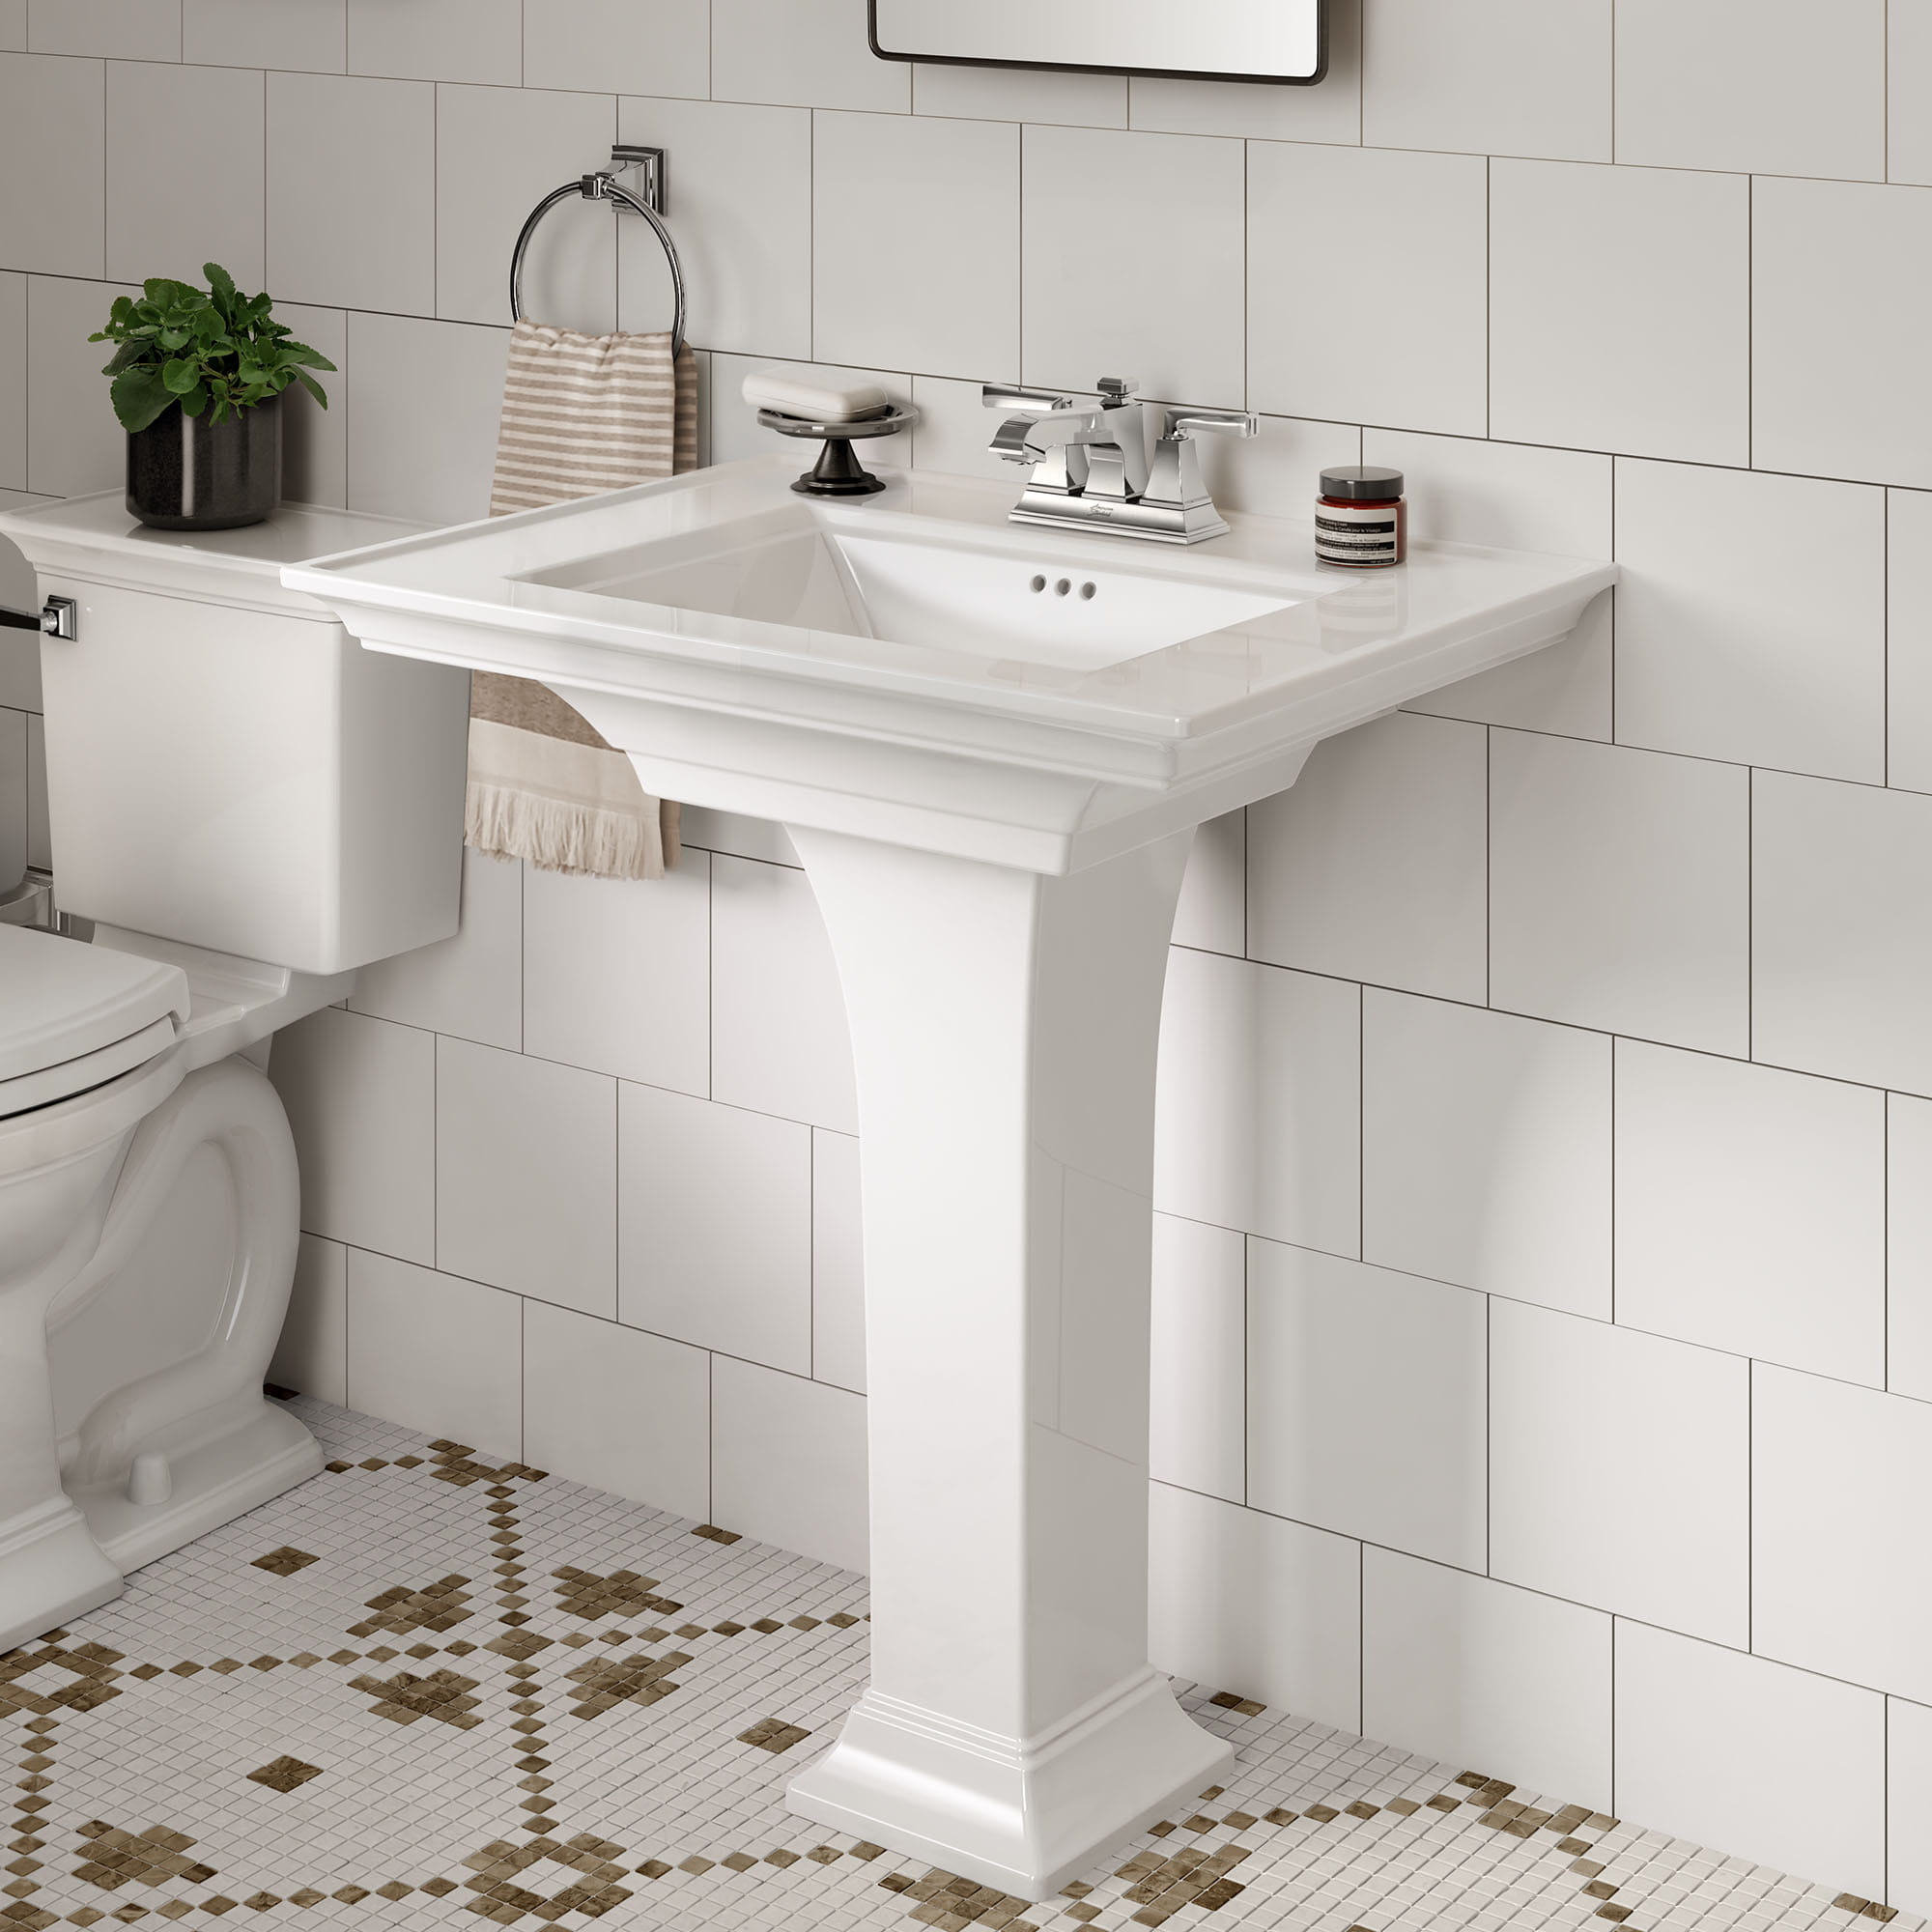 Town Square® S 4-Inch Centerset Pedestal Sink Top